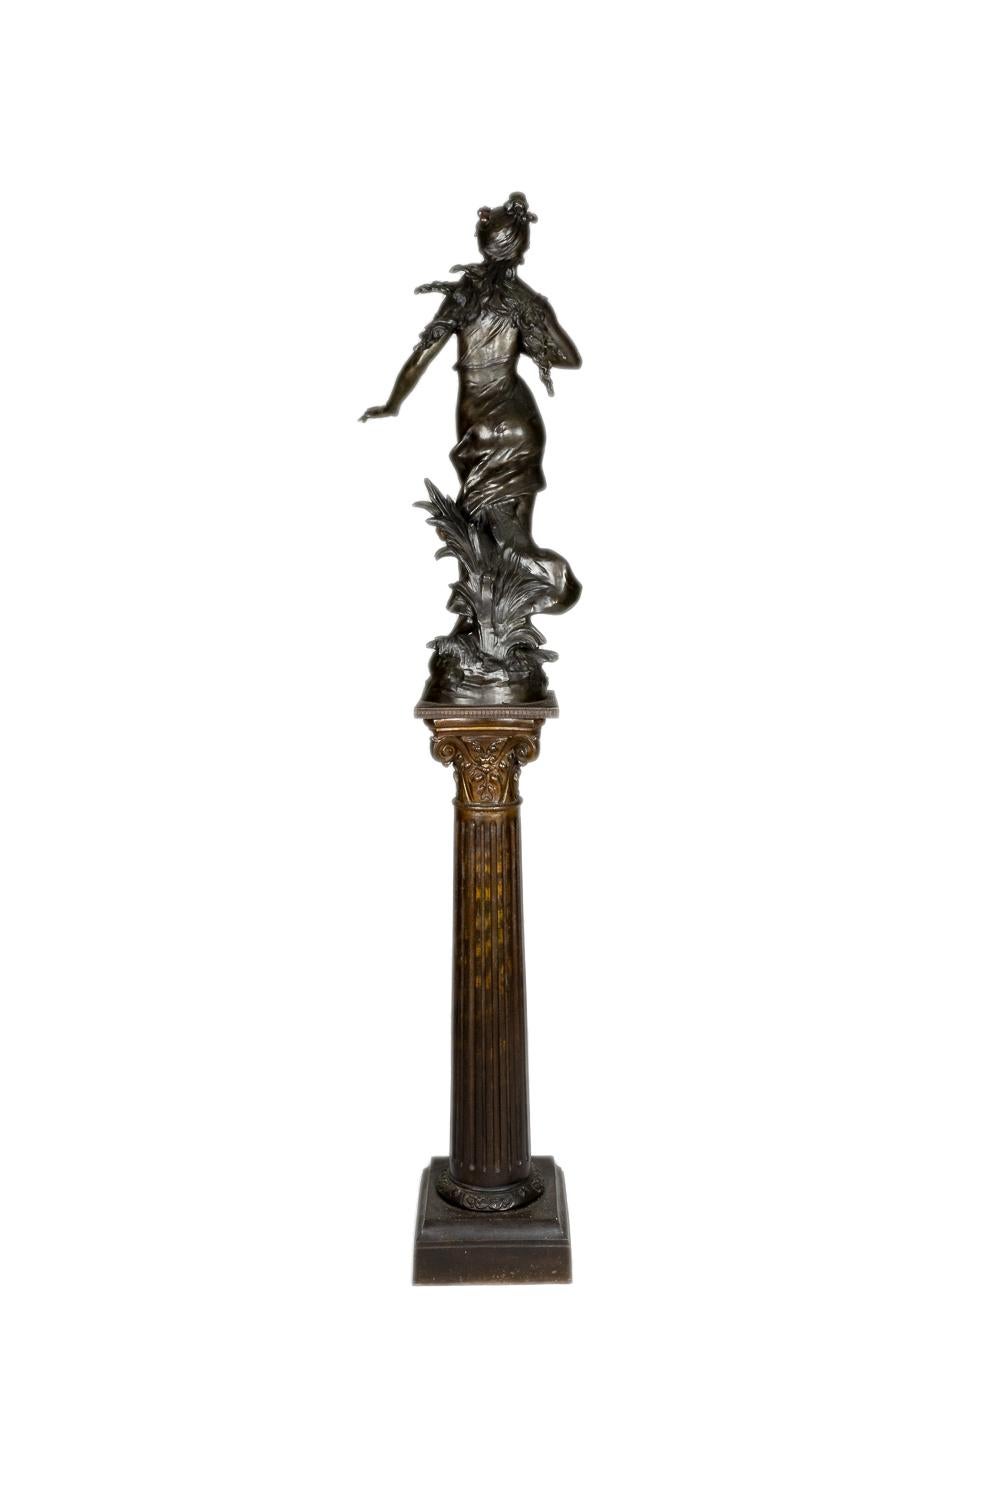 A Woman with Roses 19th Century spelter statue and column of a young woman in a flowing dress, rose garland on her head and rose on her lapel, a floral motif, signed“Aug Moreau” on the  base.

Height Total 73,62 in (188 cm)
Height column 40,15 in